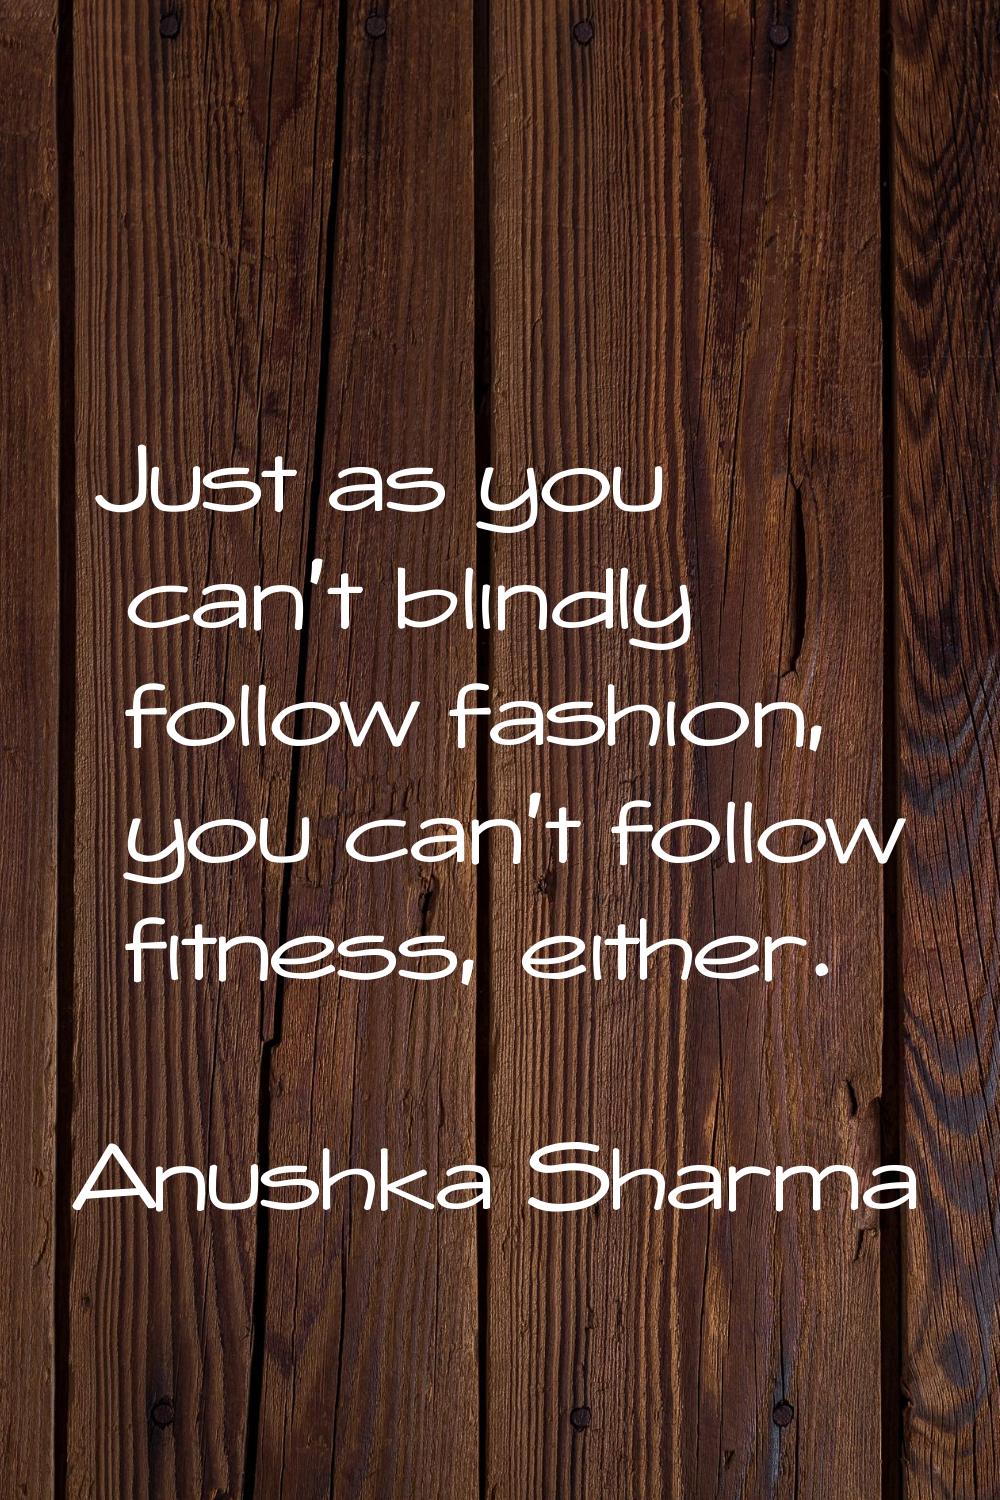 Just as you can't blindly follow fashion, you can't follow fitness, either.